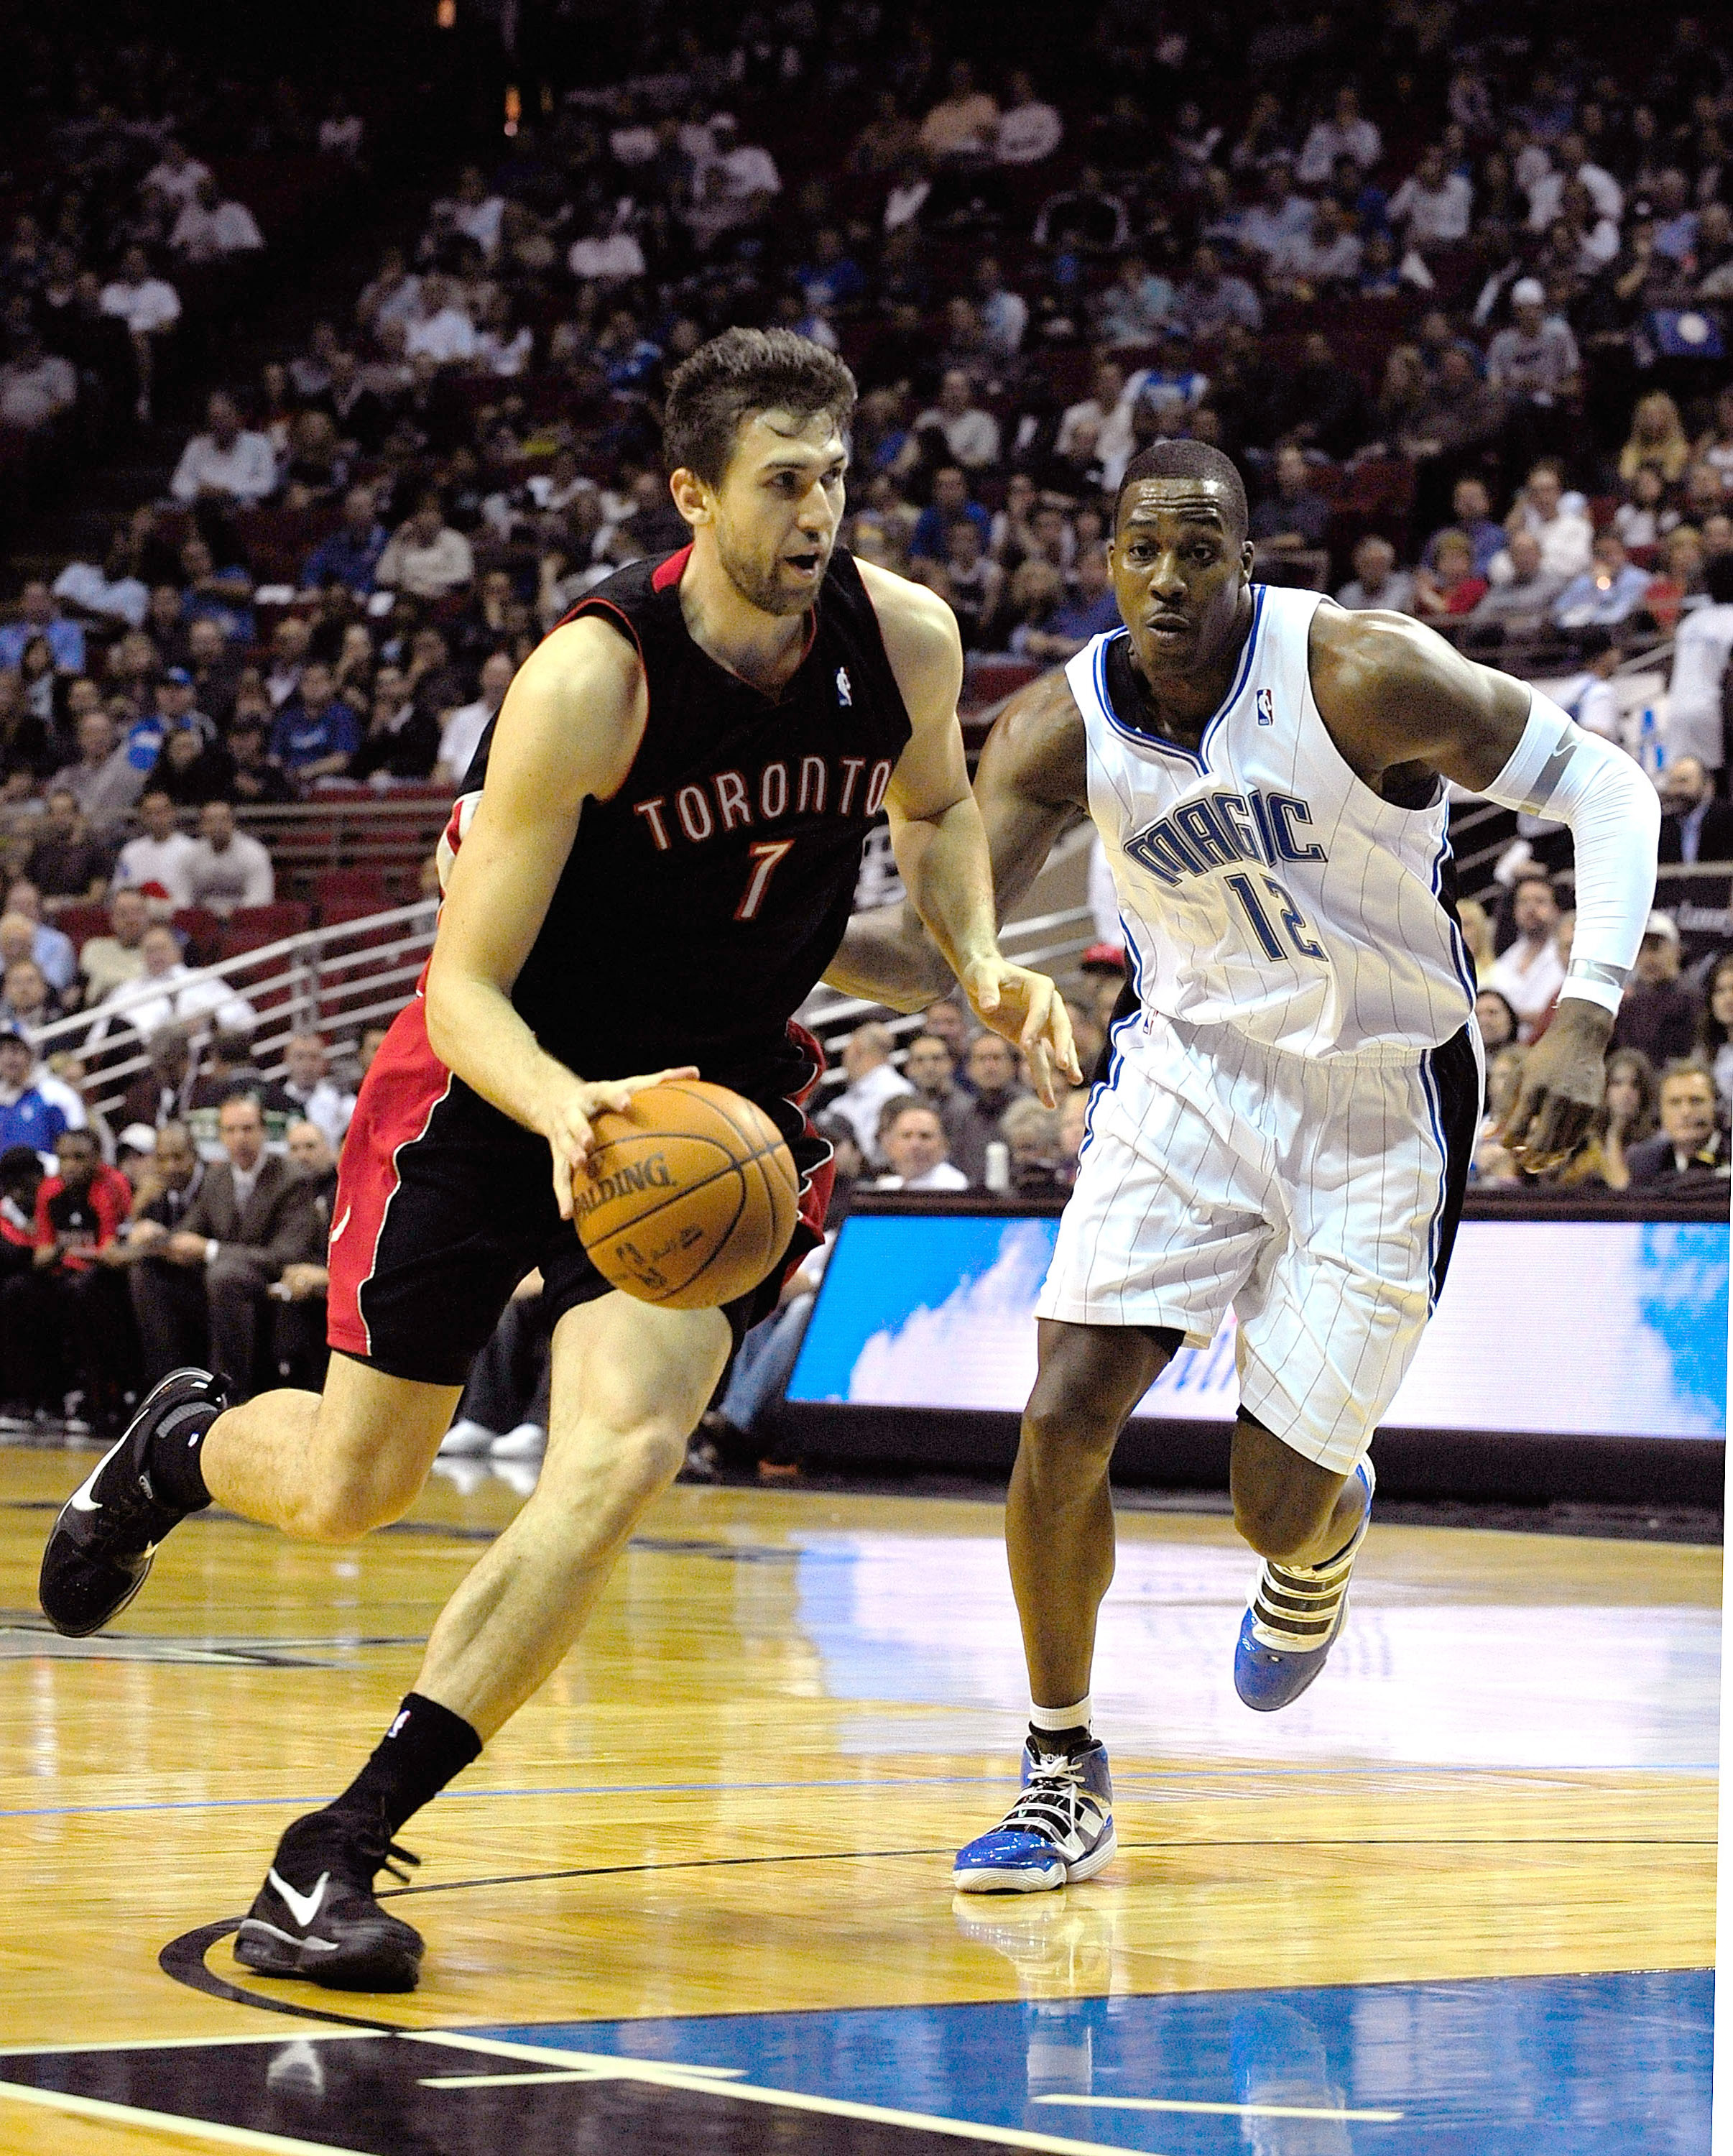 ORLANDO, FL - DECEMBER 16:  Andrea Bargnani #7 of the Toronto Raptors drives past Dwight Howard #12 of the Orlando Magic during the game at Amway Arena on December 16, 2009 in Orlando, Florida.  NOTE TO USER: User expressly acknowledges and agrees that, b